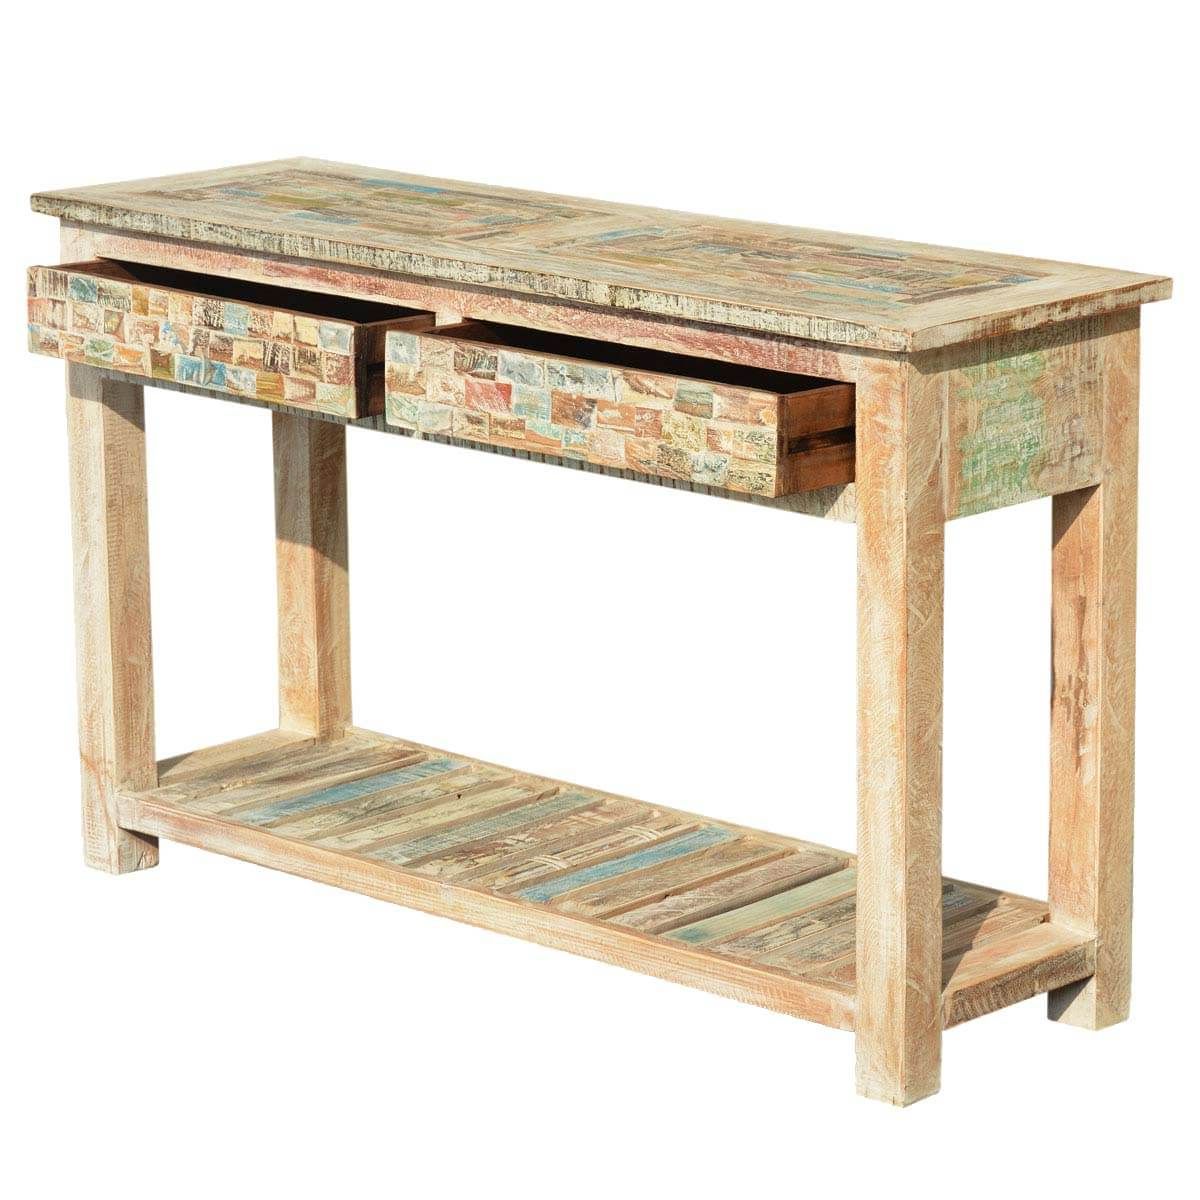 Reclaimed Wood Console Tables Regarding Most Recent Paint Box Reclaimed Wood Pastel  (View 6 of 10)